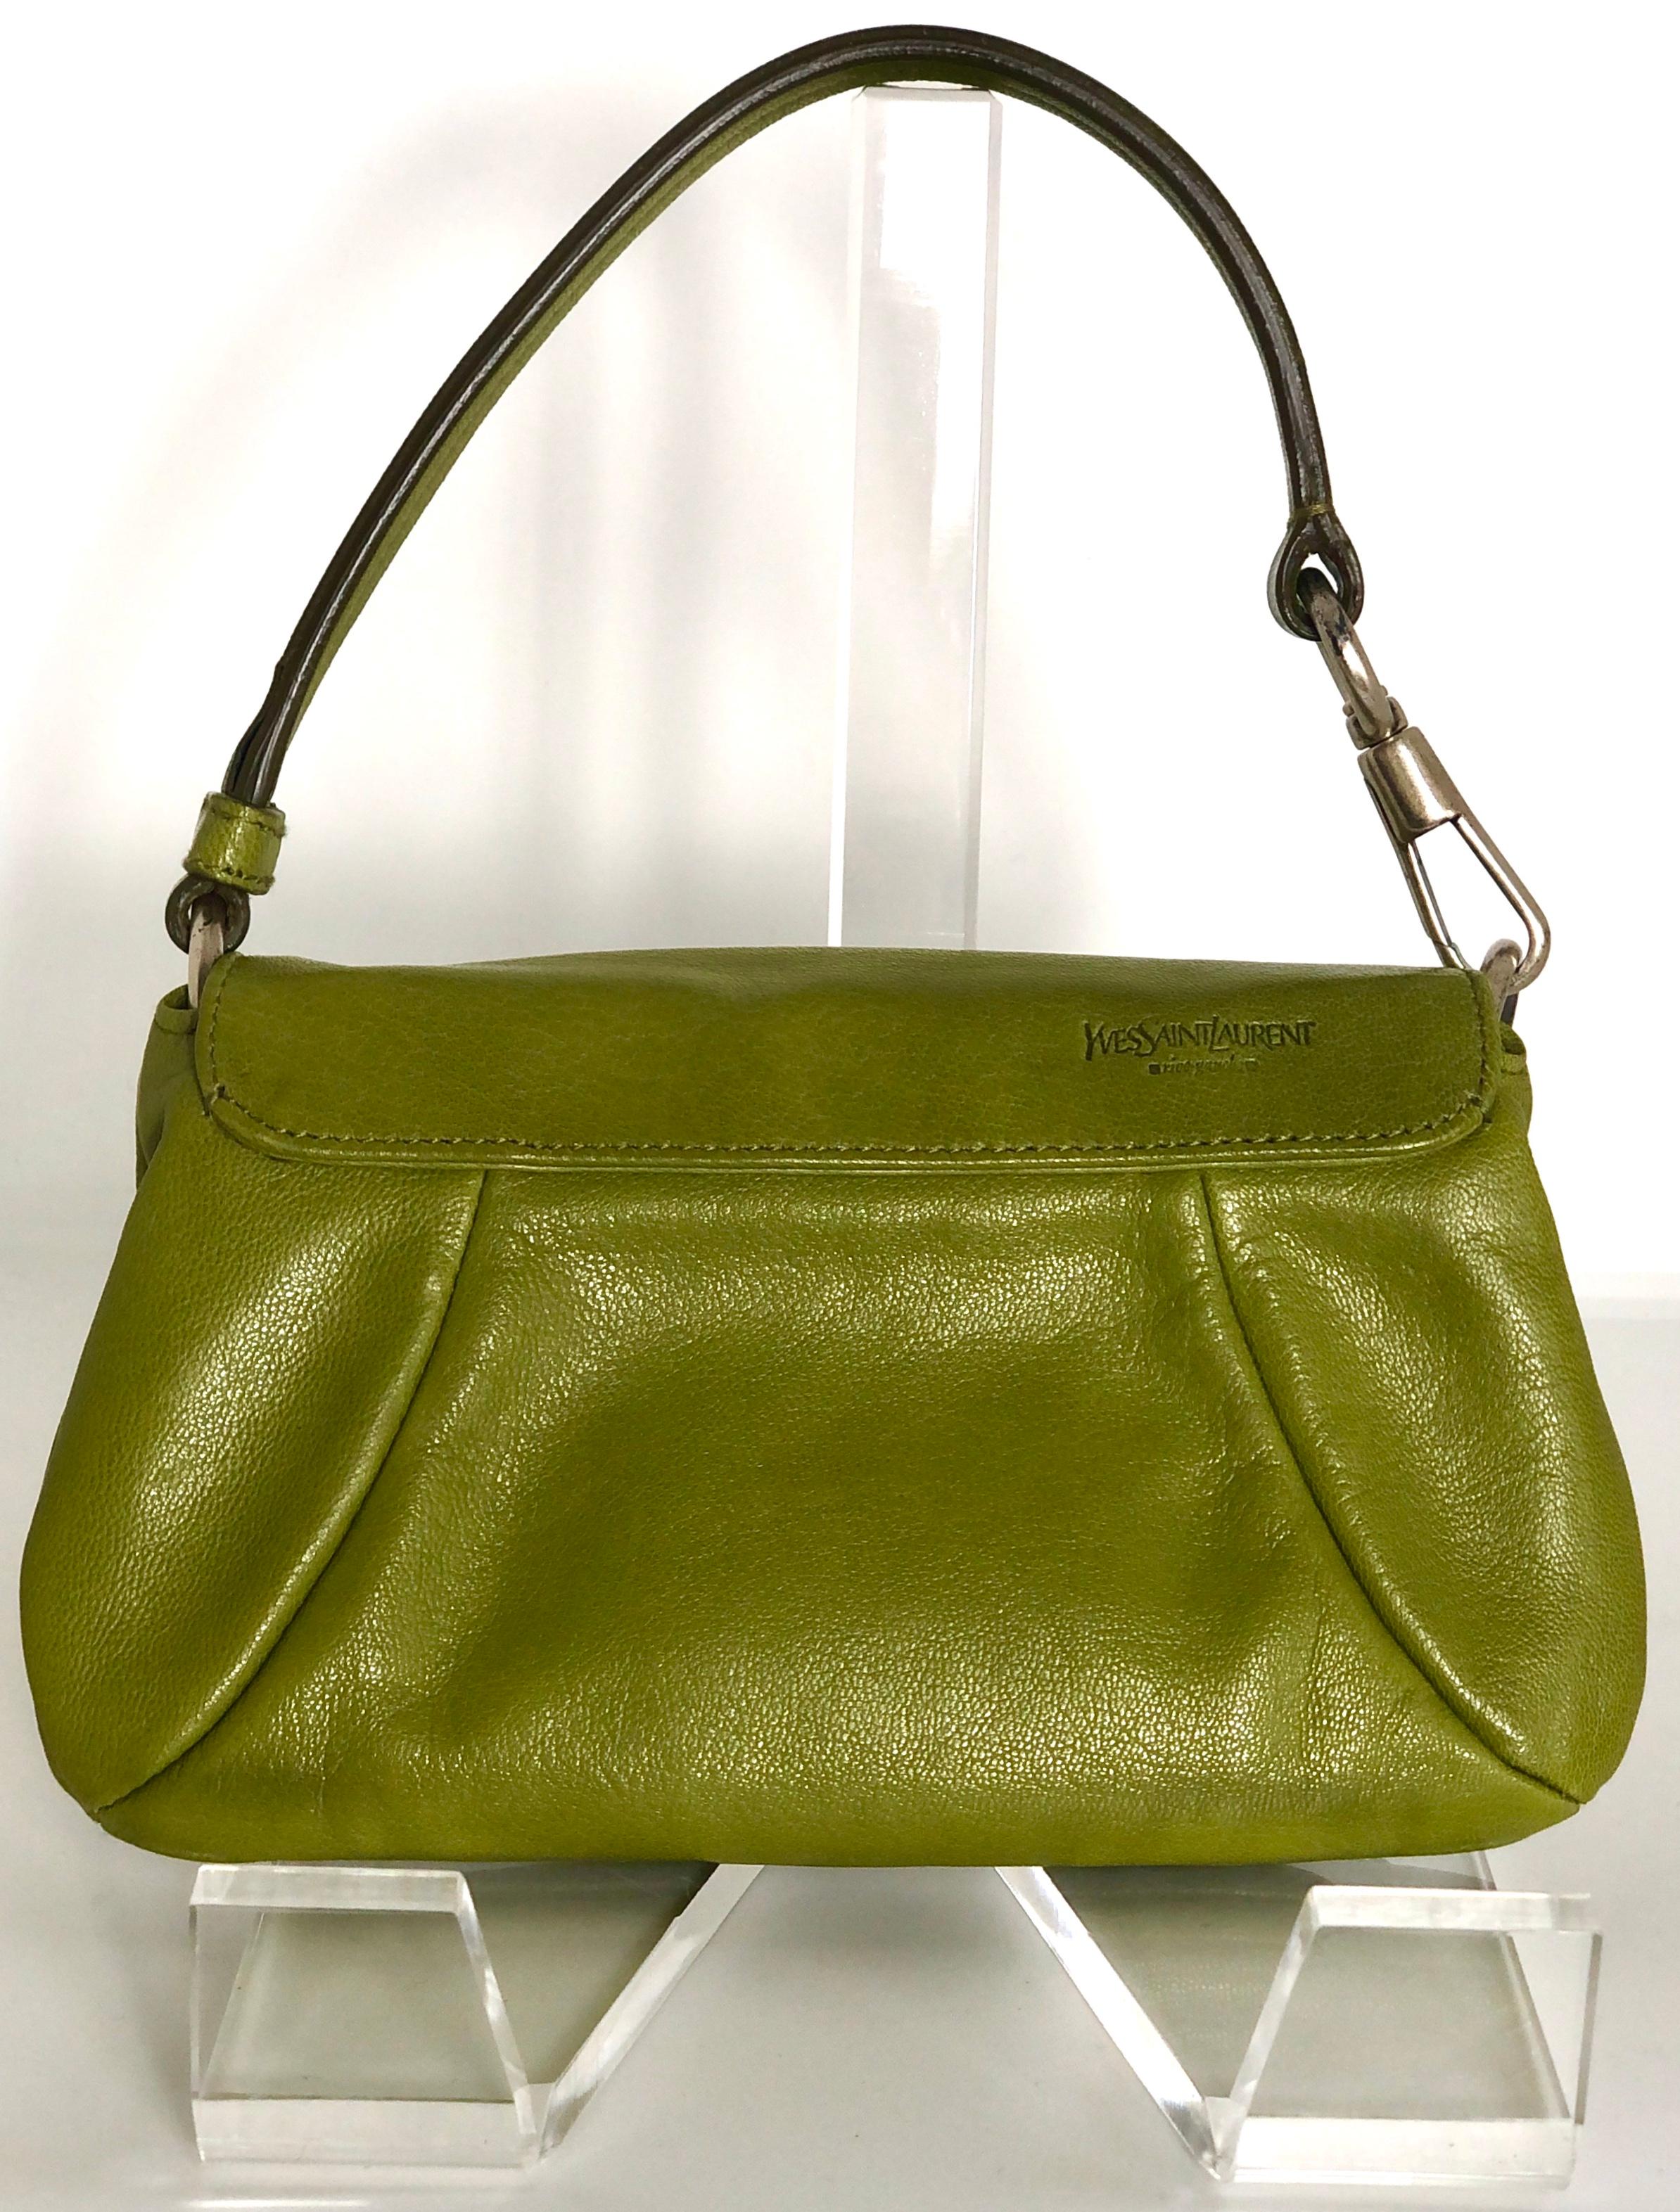 Offered is a signed Yves Saint Laurent chartreuse green leather floral ruffle theme mini shoulder 
bag, wristlet, clutch or top handle handbag.  

Make:  Yves Saint Laurent / YSL
Place of Manufacture:  France / Italy
Color:  Chartreuse green